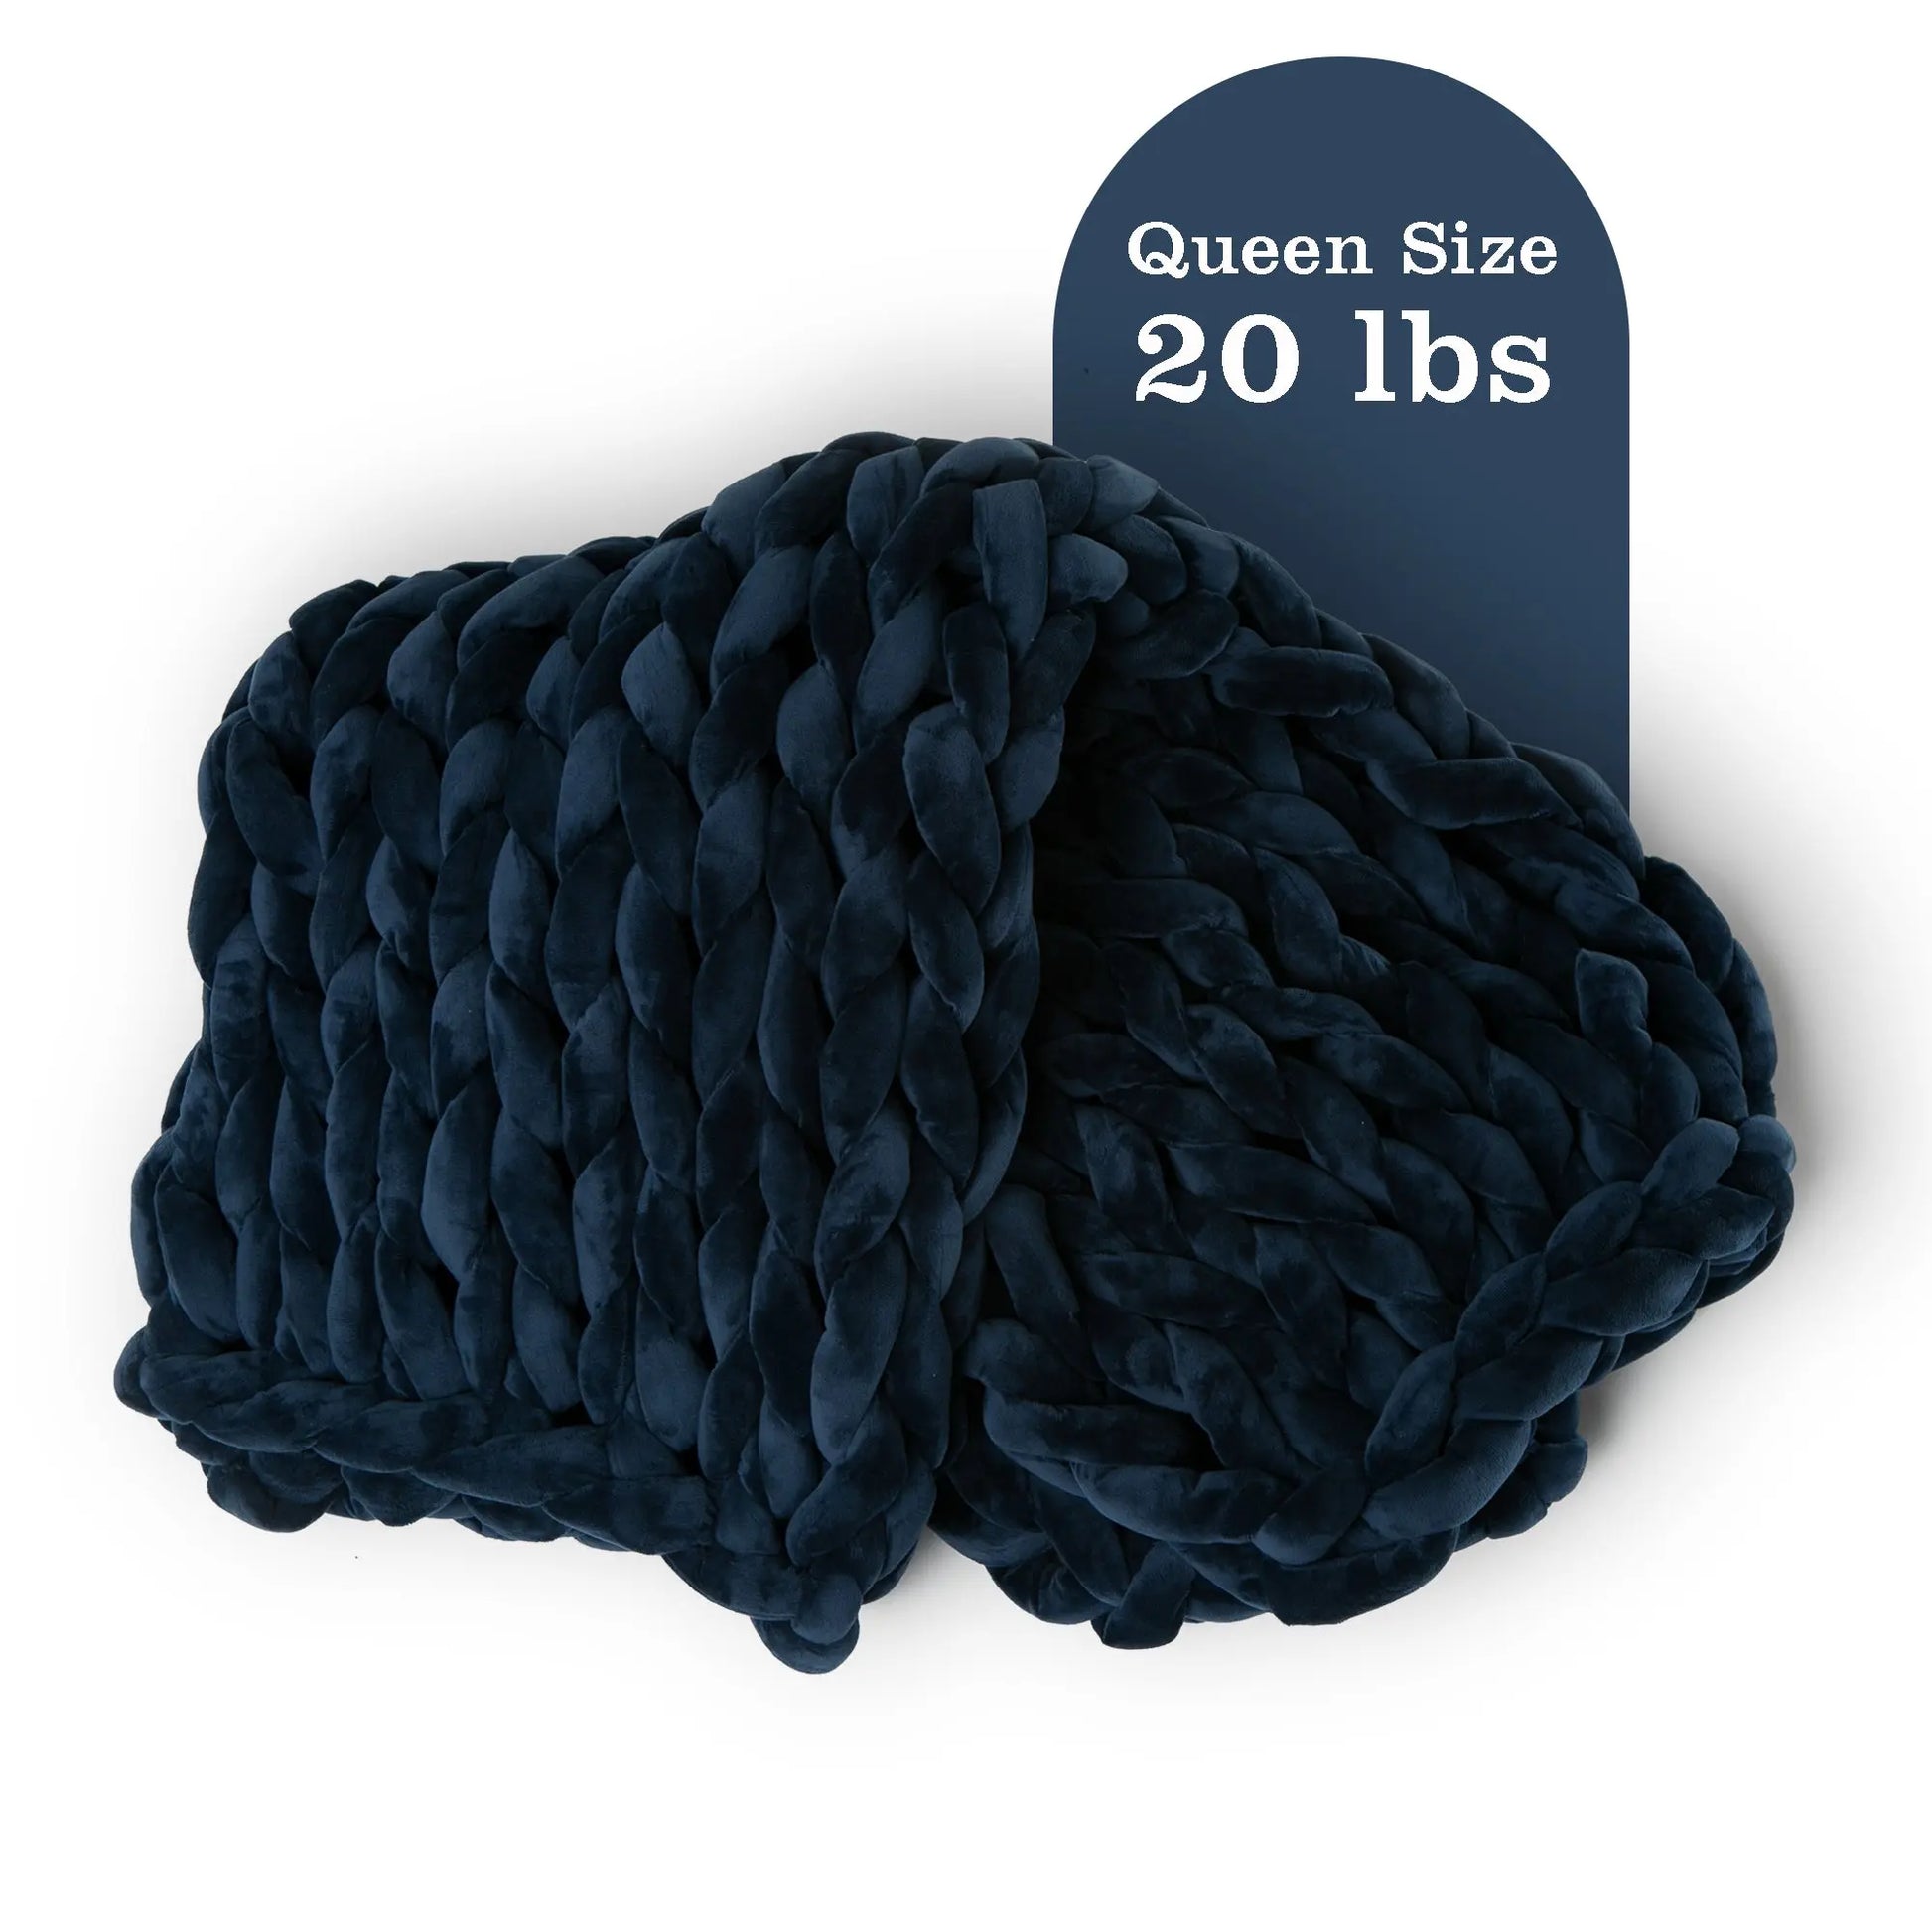 ColeyBear Chunky Knit Weighted Blanket for Anxiety (Navy Blue) ColeyBear